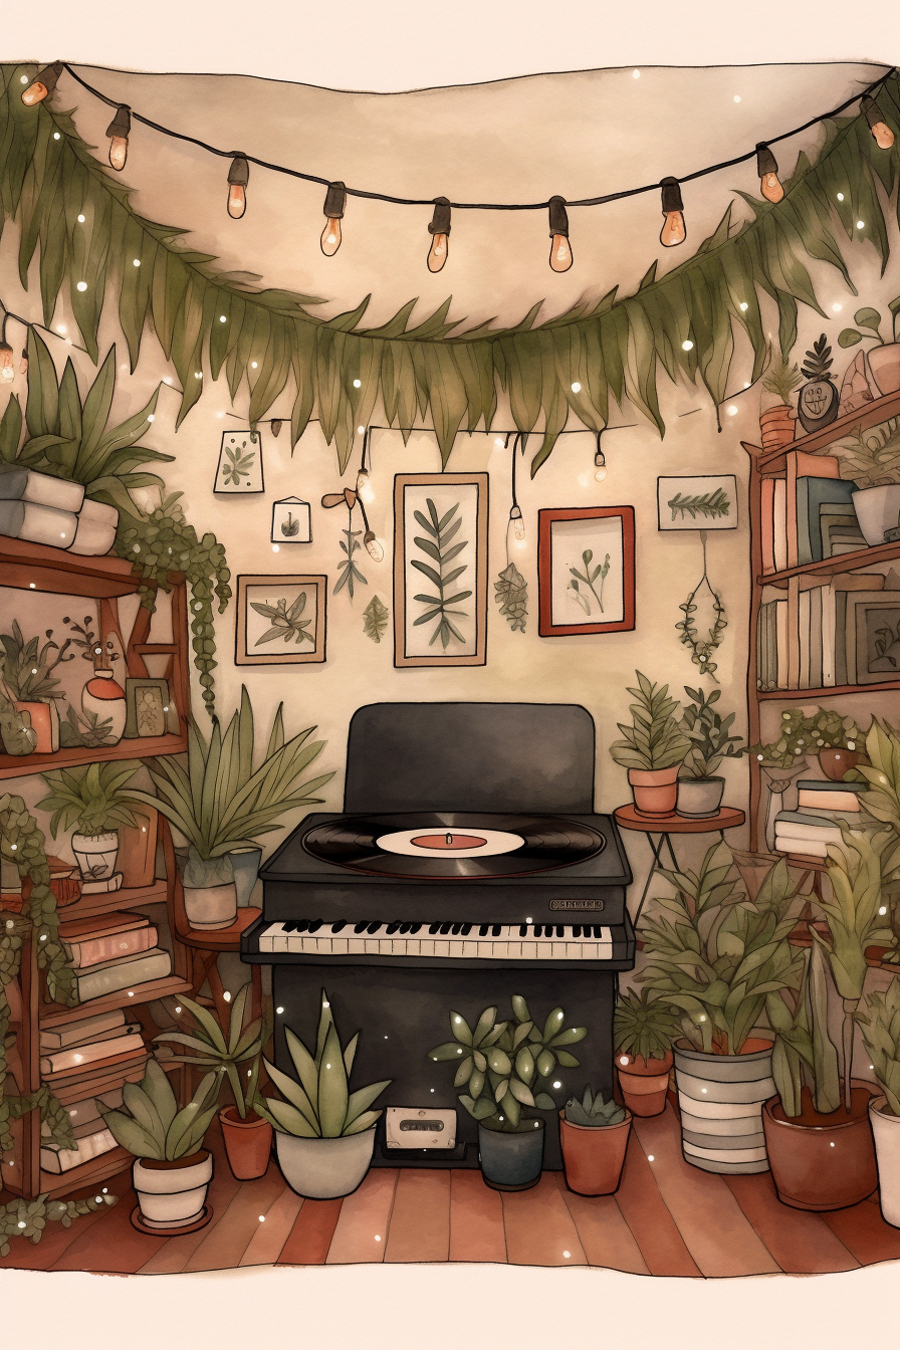 A room with a piano and plants.